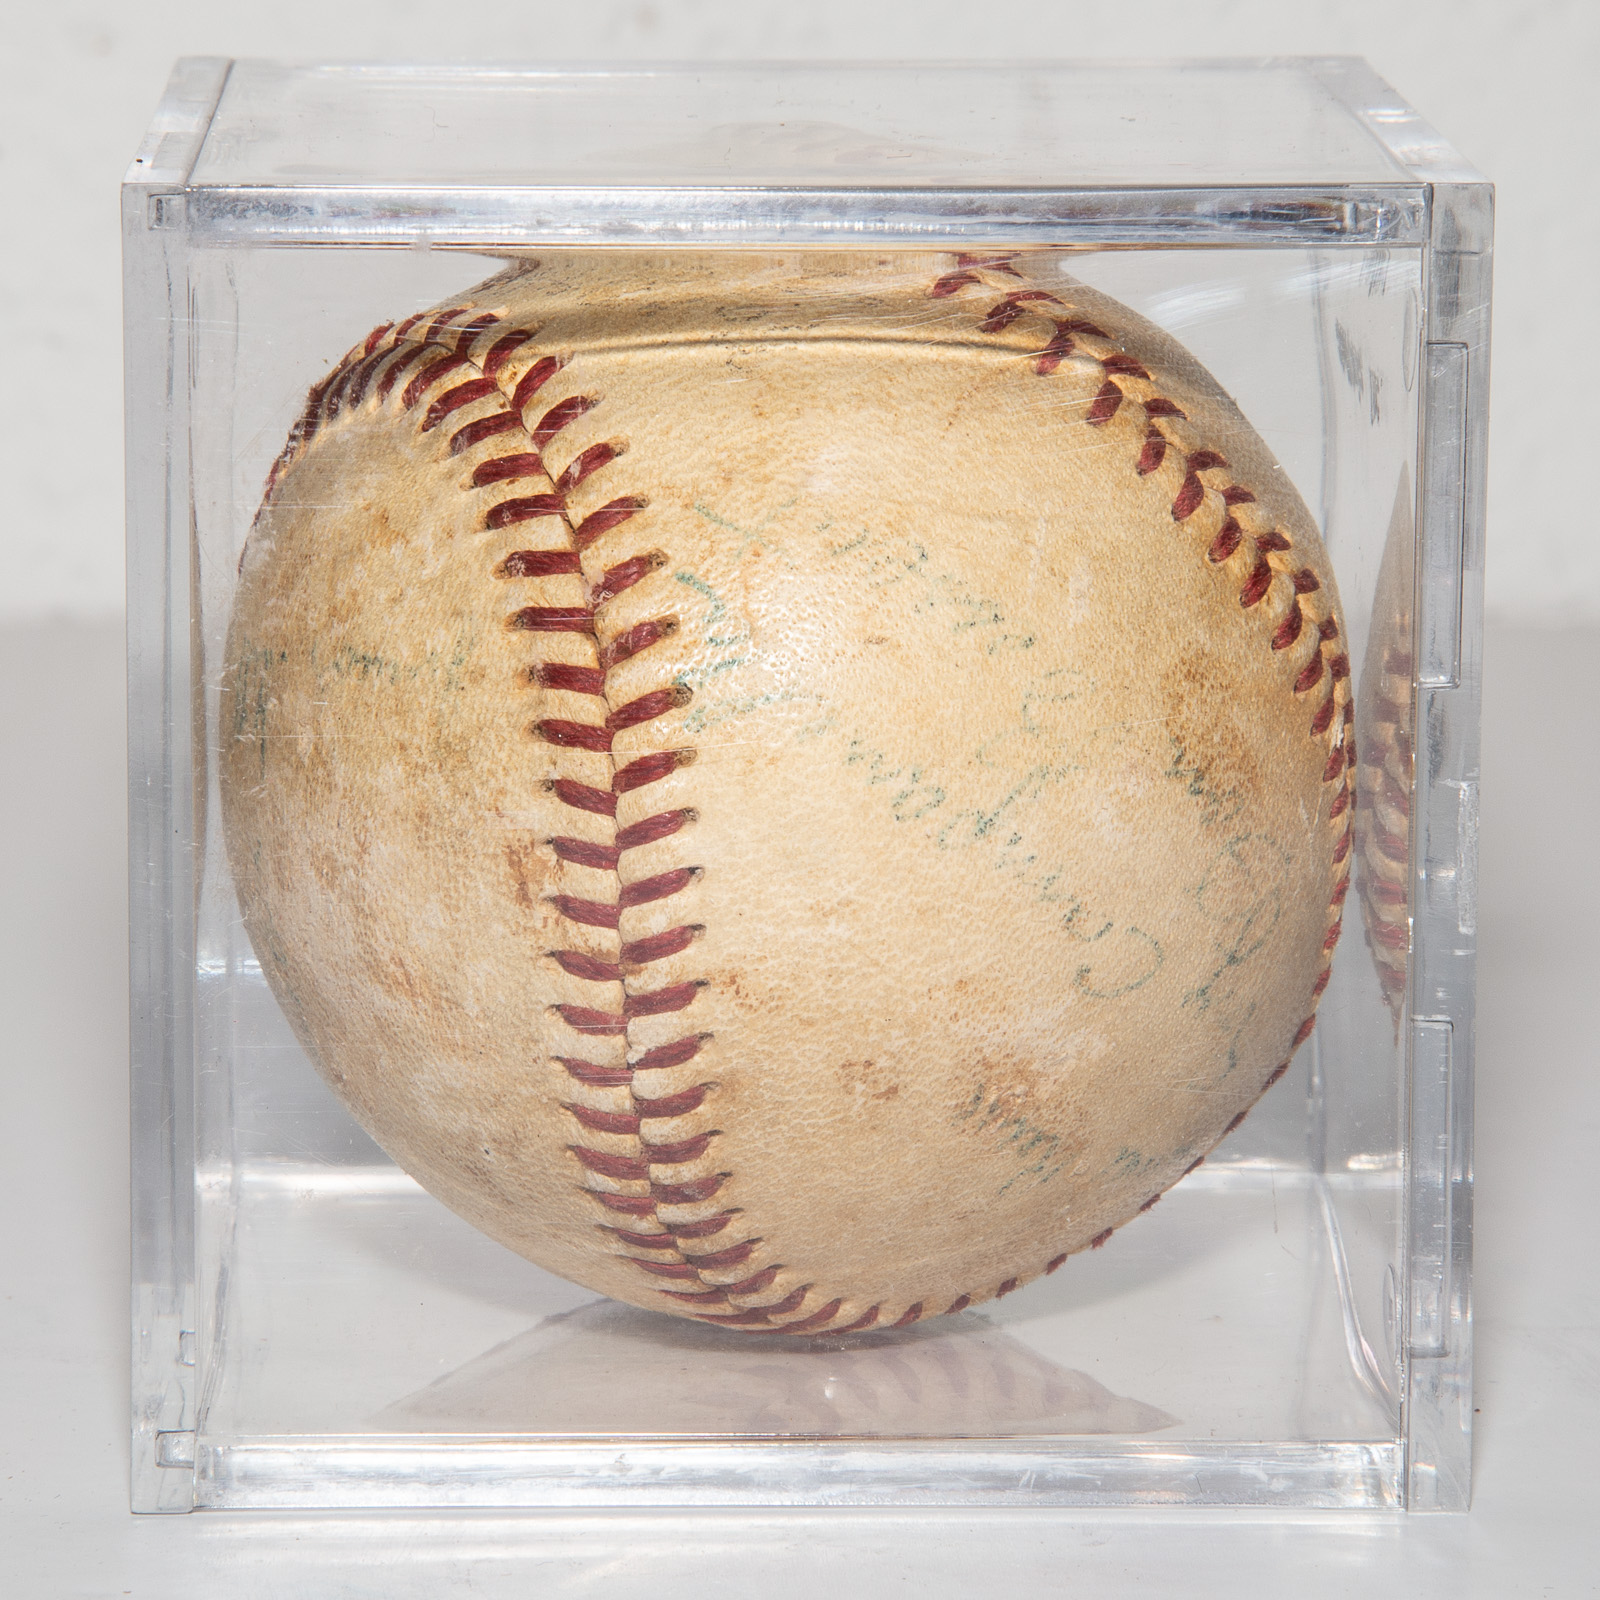 VINTAGE SIGNED BASEBALL Includes 337acc